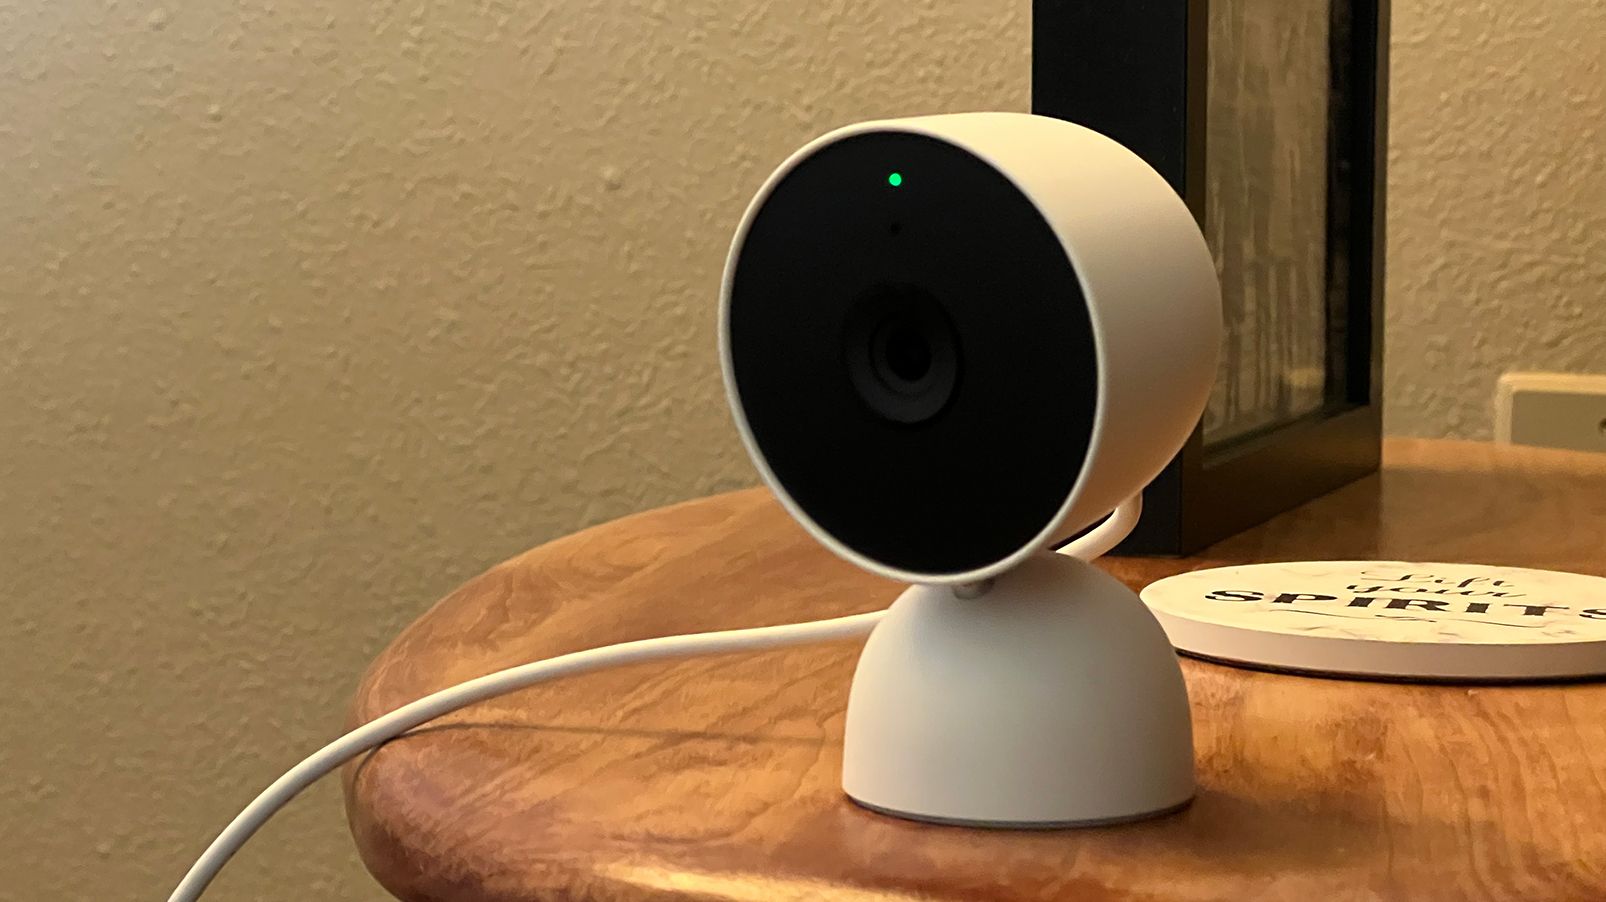 groef Kantine Octrooi Nest Cam Wired review: The indoor security camera to get — if you love  Google | CNN Underscored